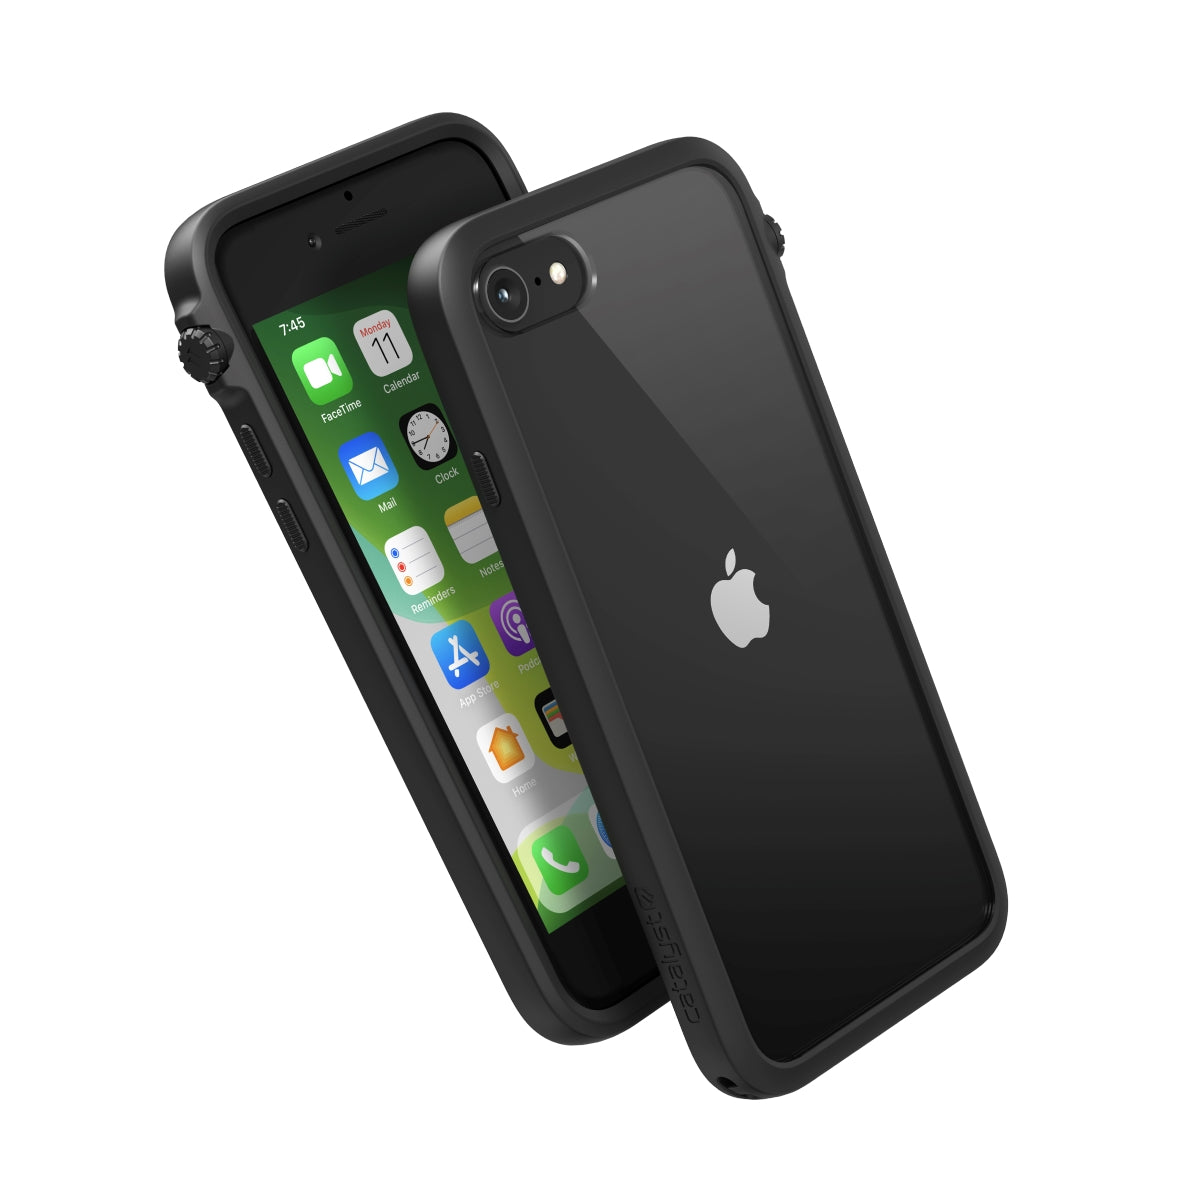 Catalyst iphone 8/7 impact proterction case showing the side front and back view of the case in a stealth black colorway